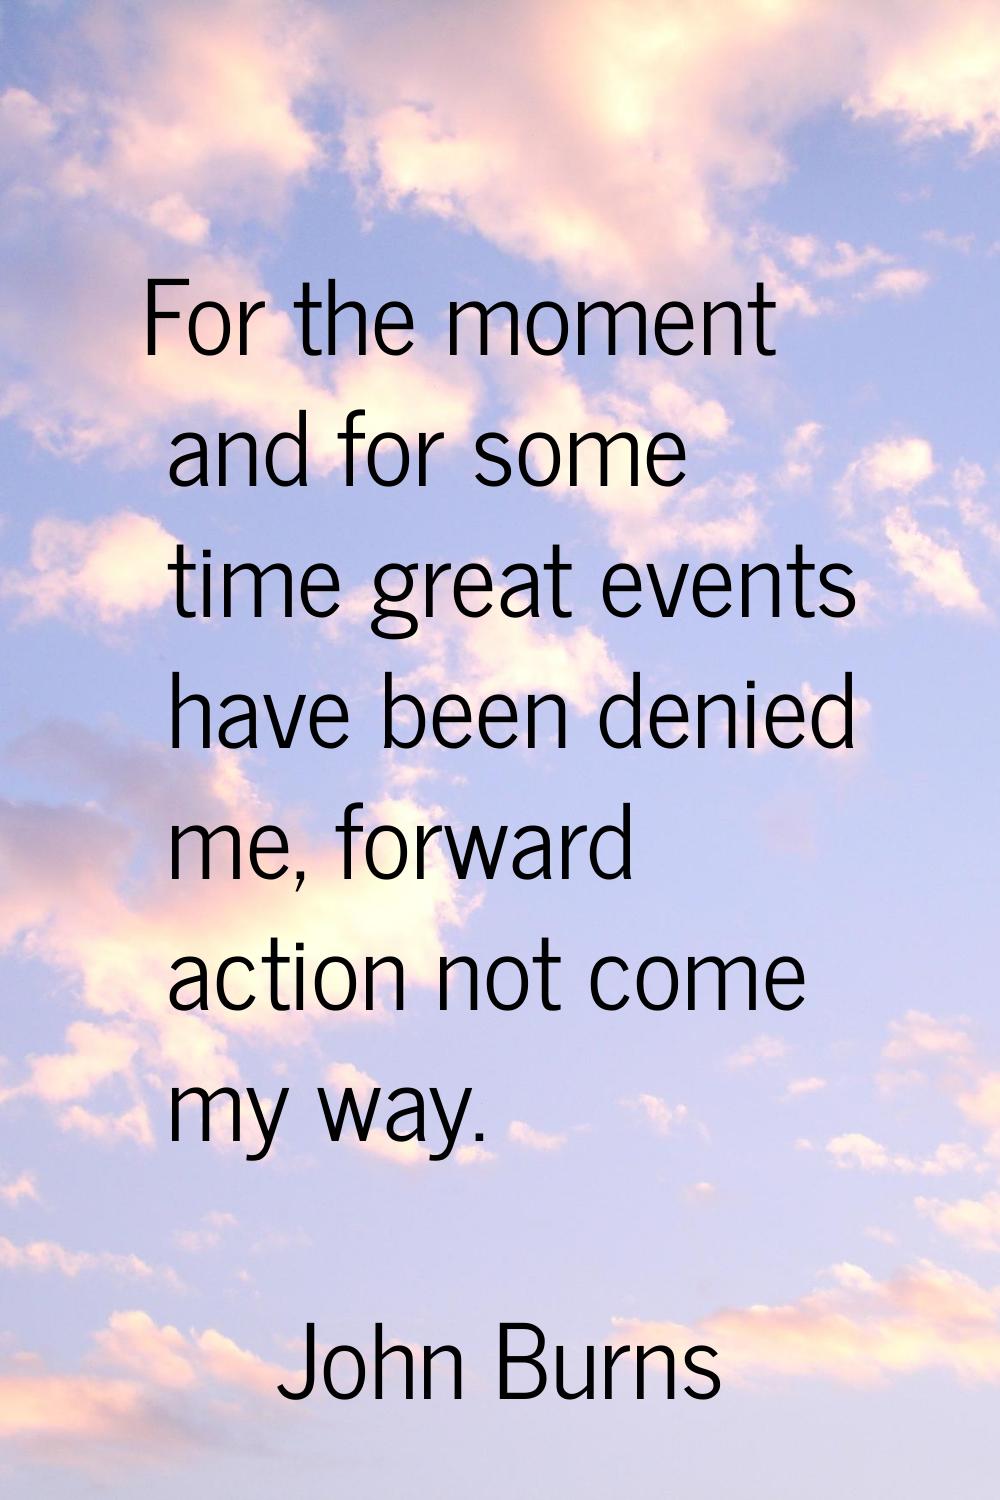 For the moment and for some time great events have been denied me, forward action not come my way.